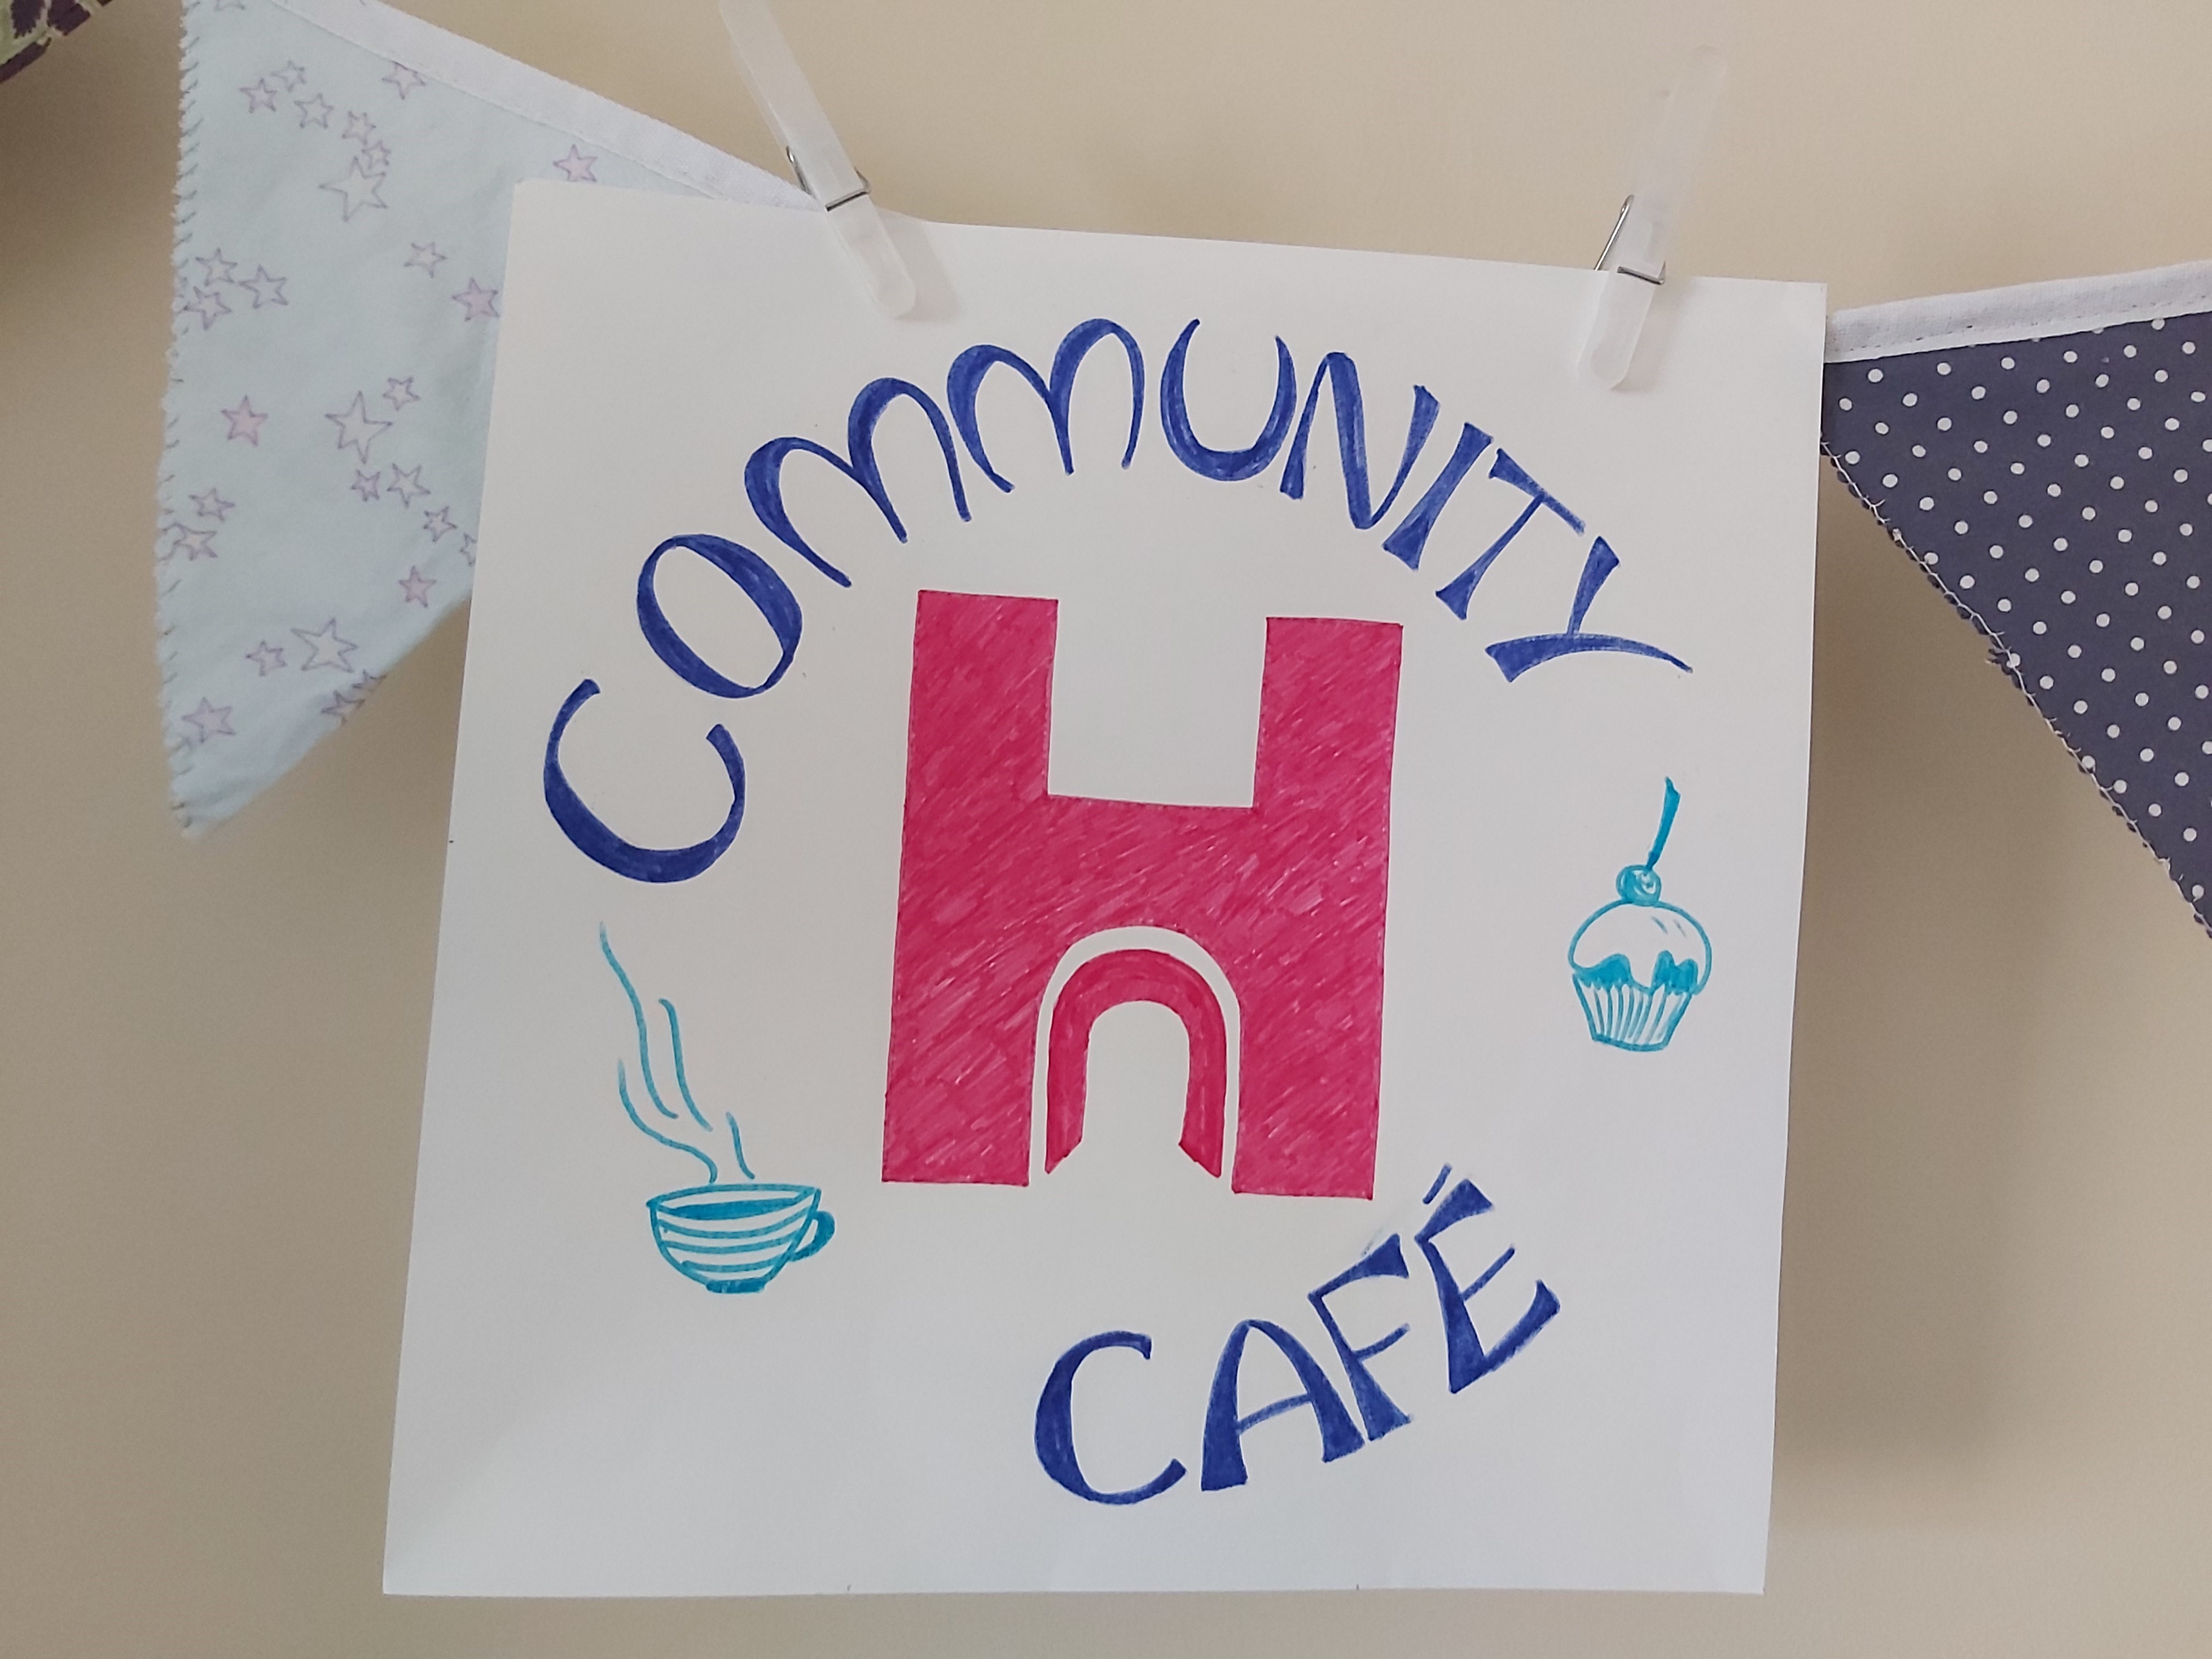 Hand-drawn square sign for Community Cafe, with pink H logo.